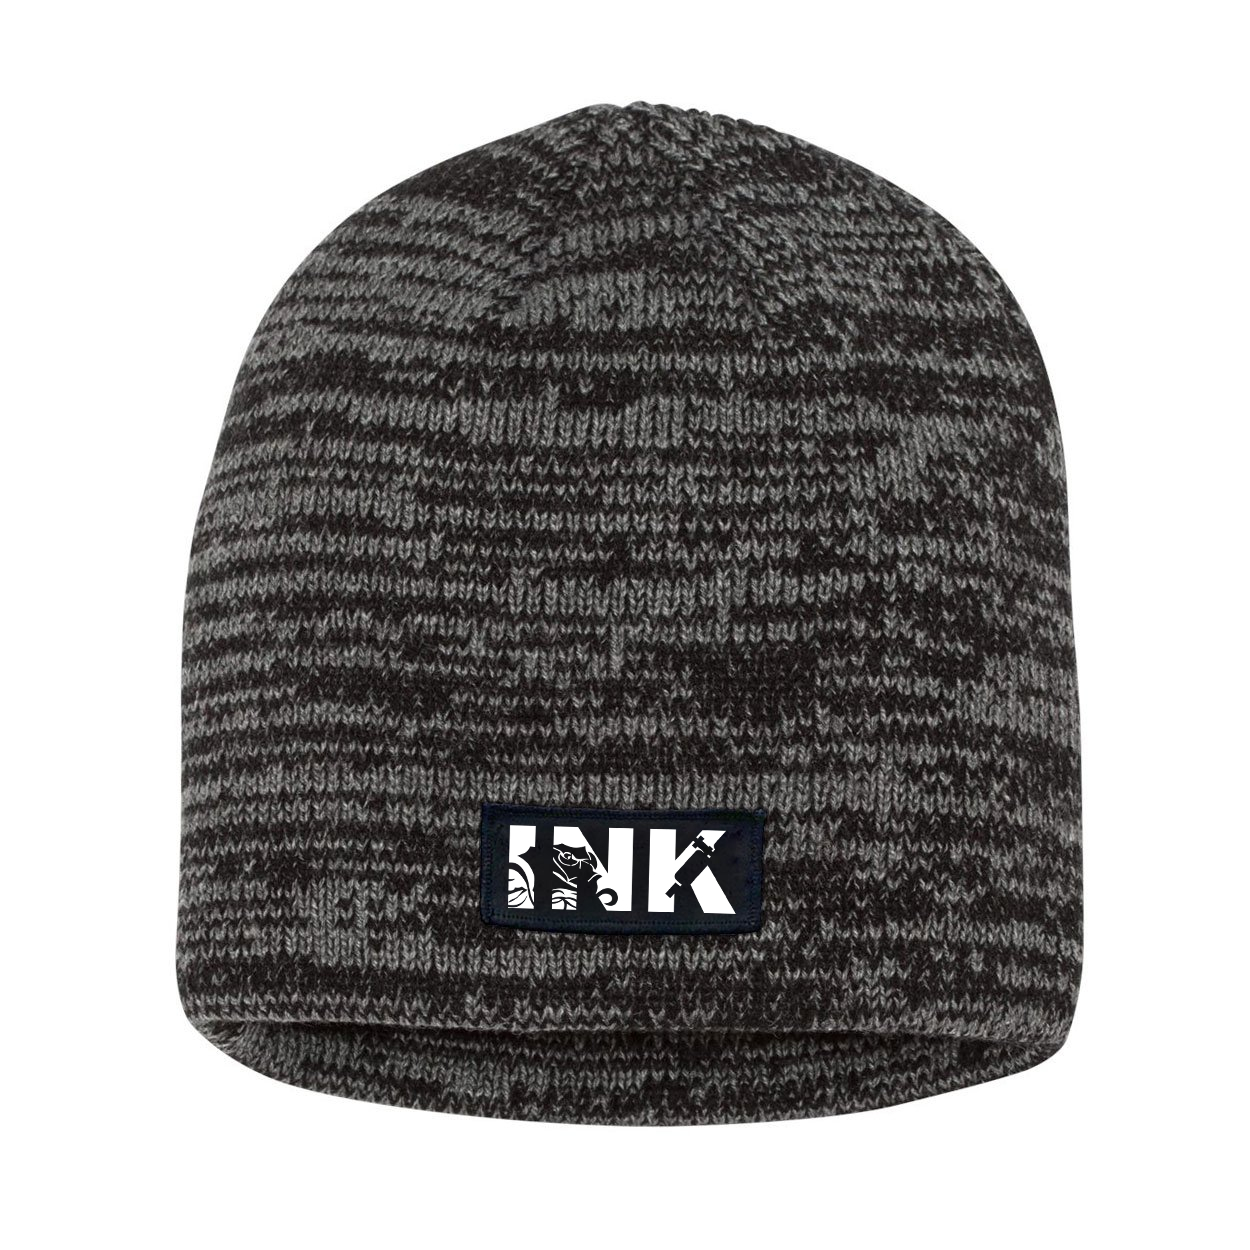 Ink Tattoo Logo Night Out Woven Patch Skully Marled Knit Beanie Black/Gray (White Logo)